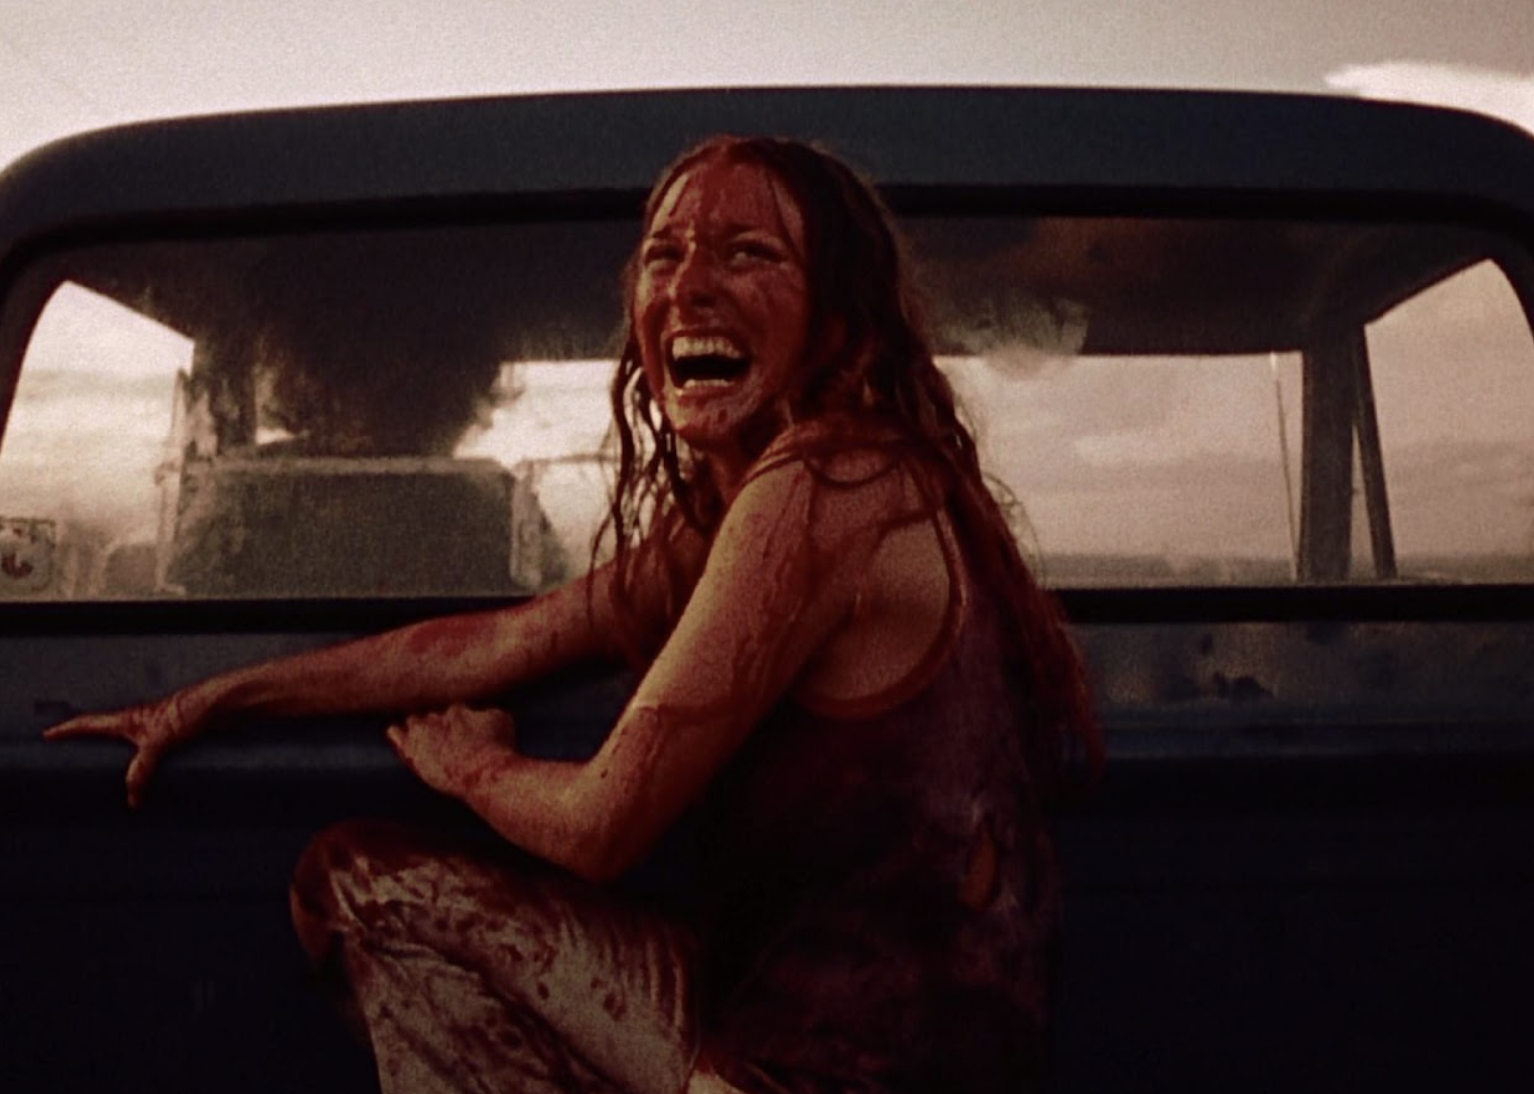 Marilyn Burns in "The Texas Chain Saw Massacre"